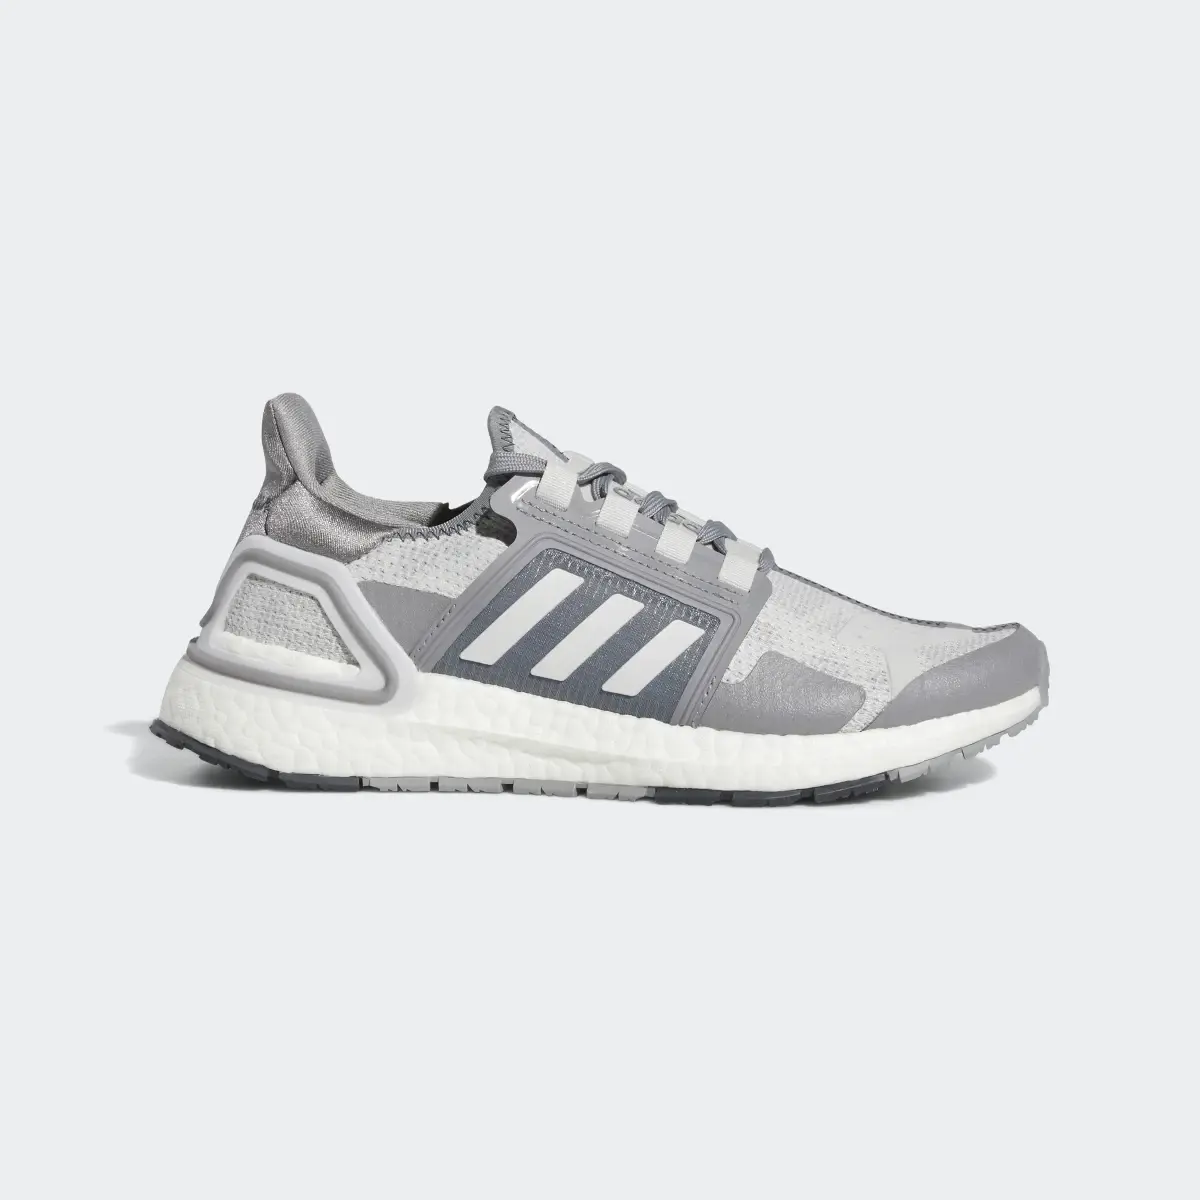 Adidas Ultraboost DNA City Explorer Outdoor Trail Running Sportswear Lifestyle Shoes. 2